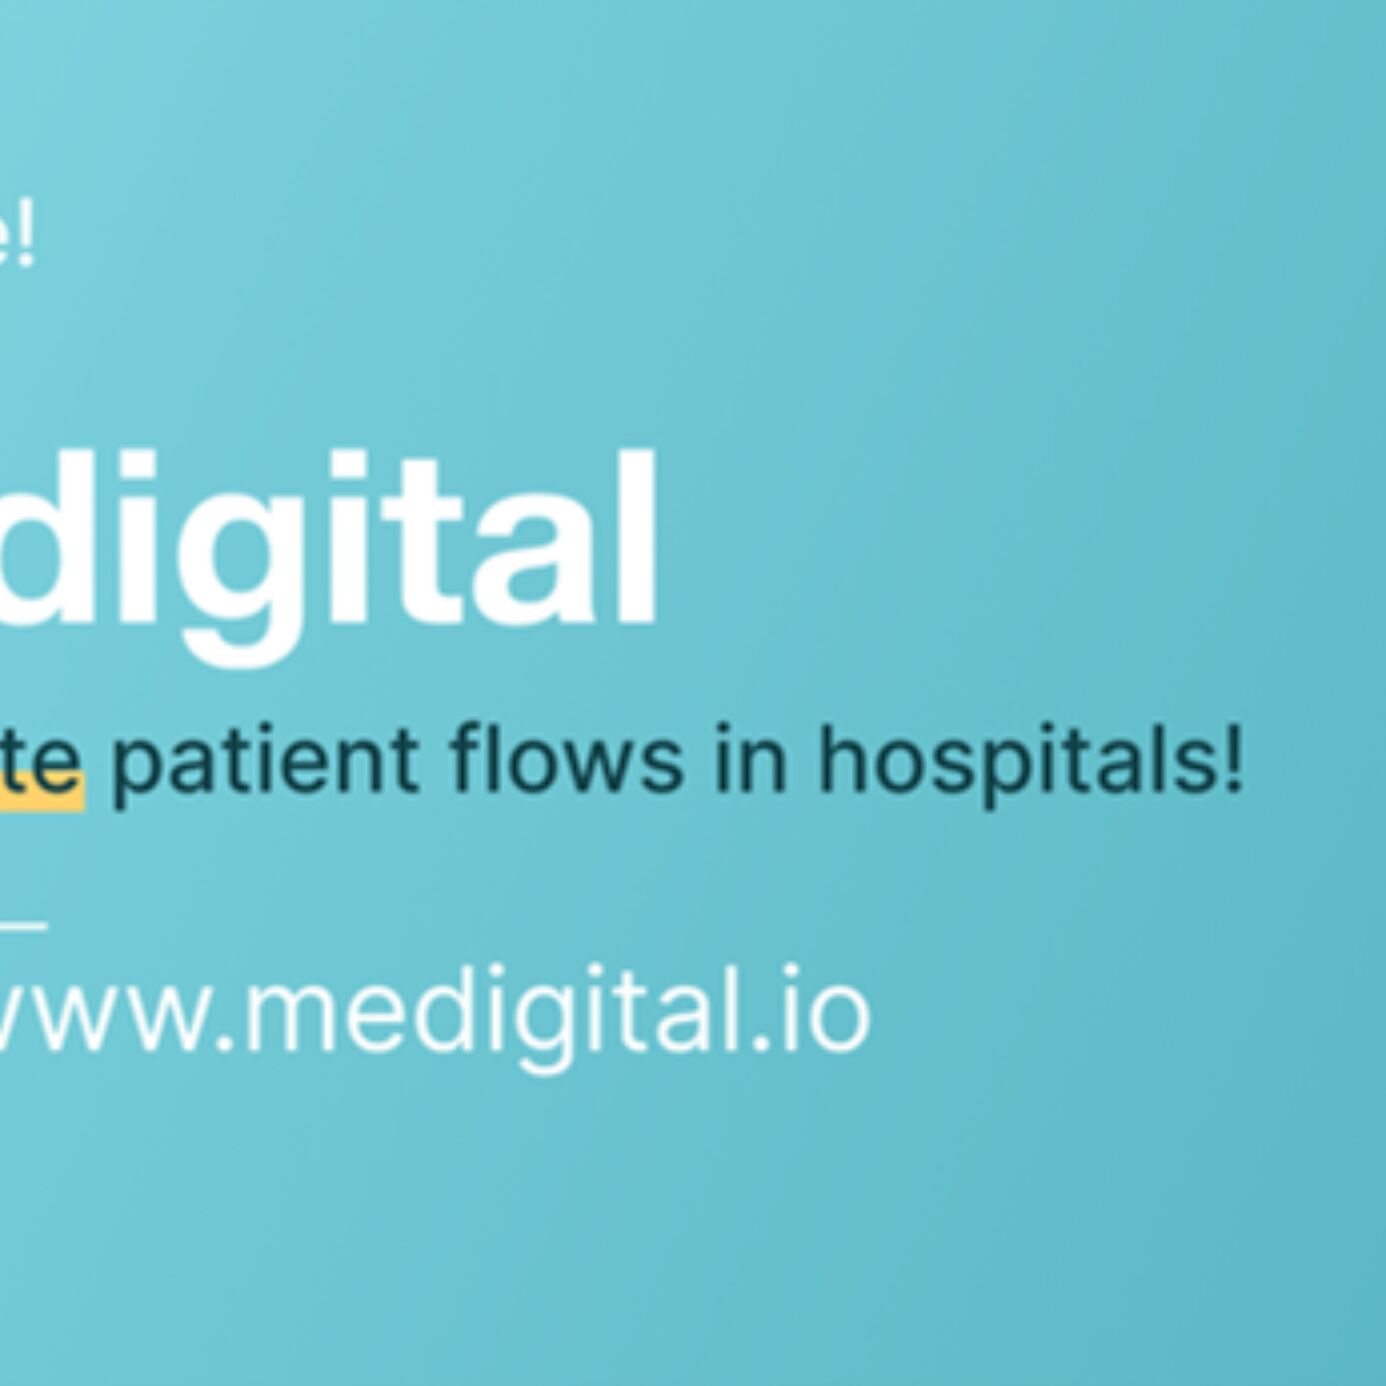 Showing the booking schedule for hospital beds of the Medigital solution